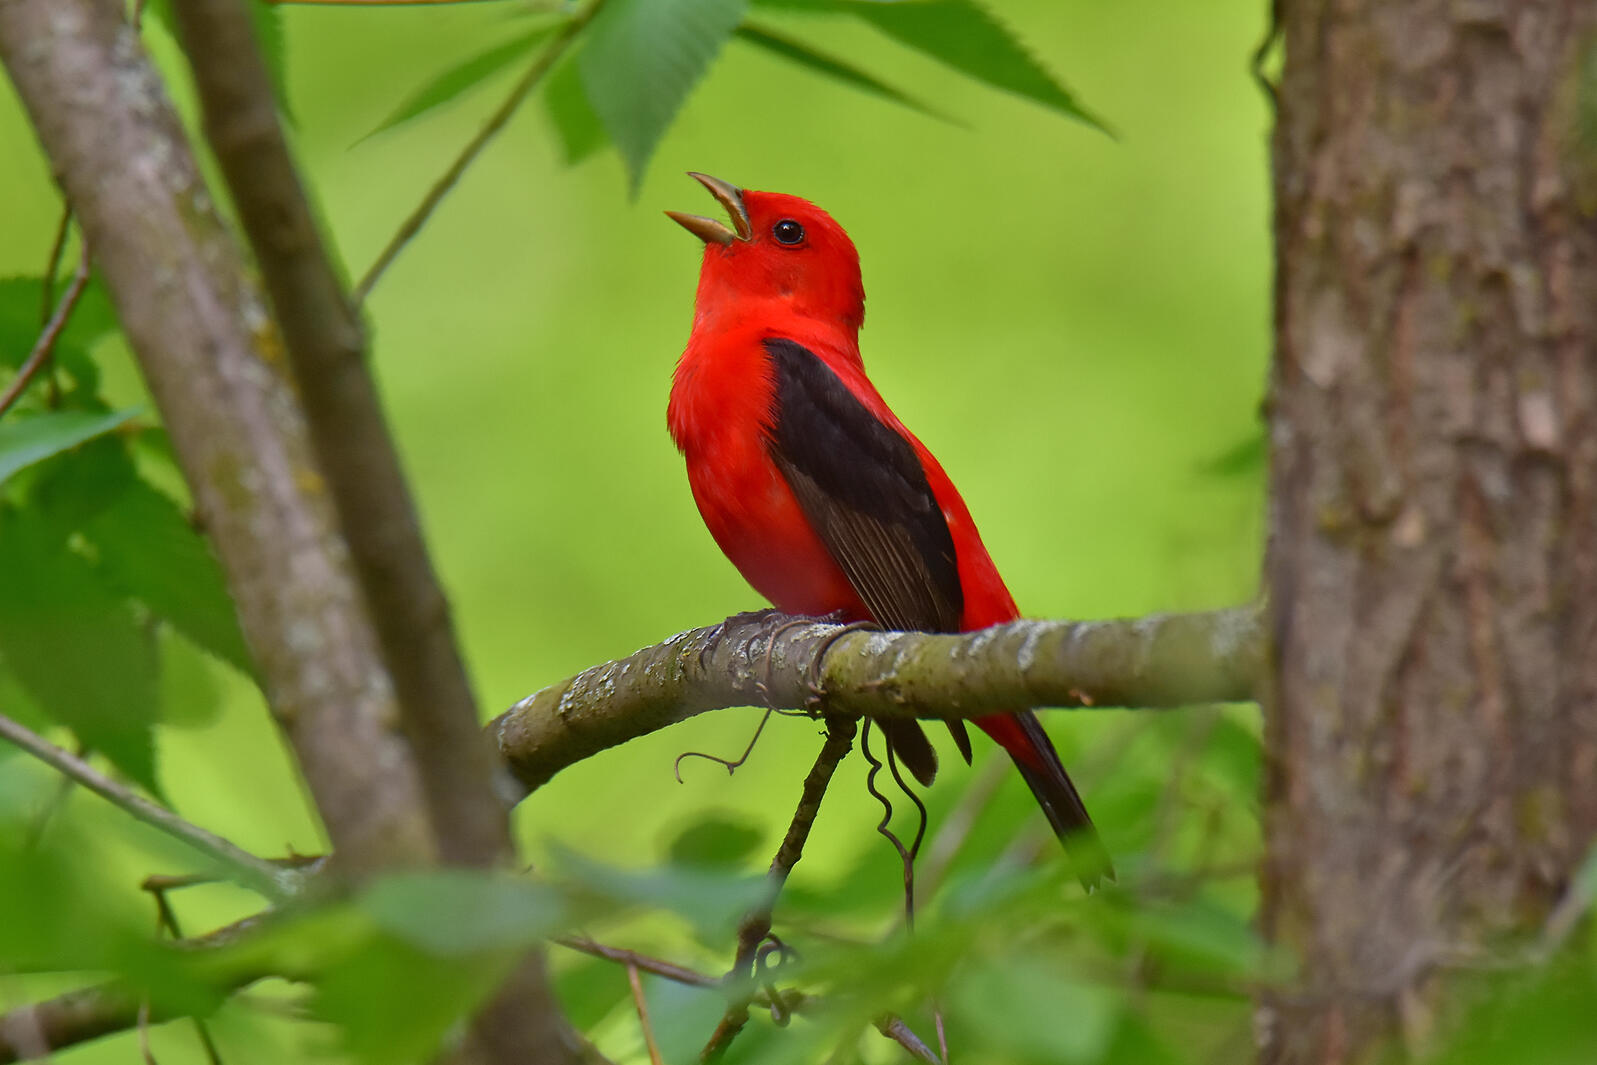 Scarlet Tanager red bird with black beak and black wings sings from branch in front of green foliage